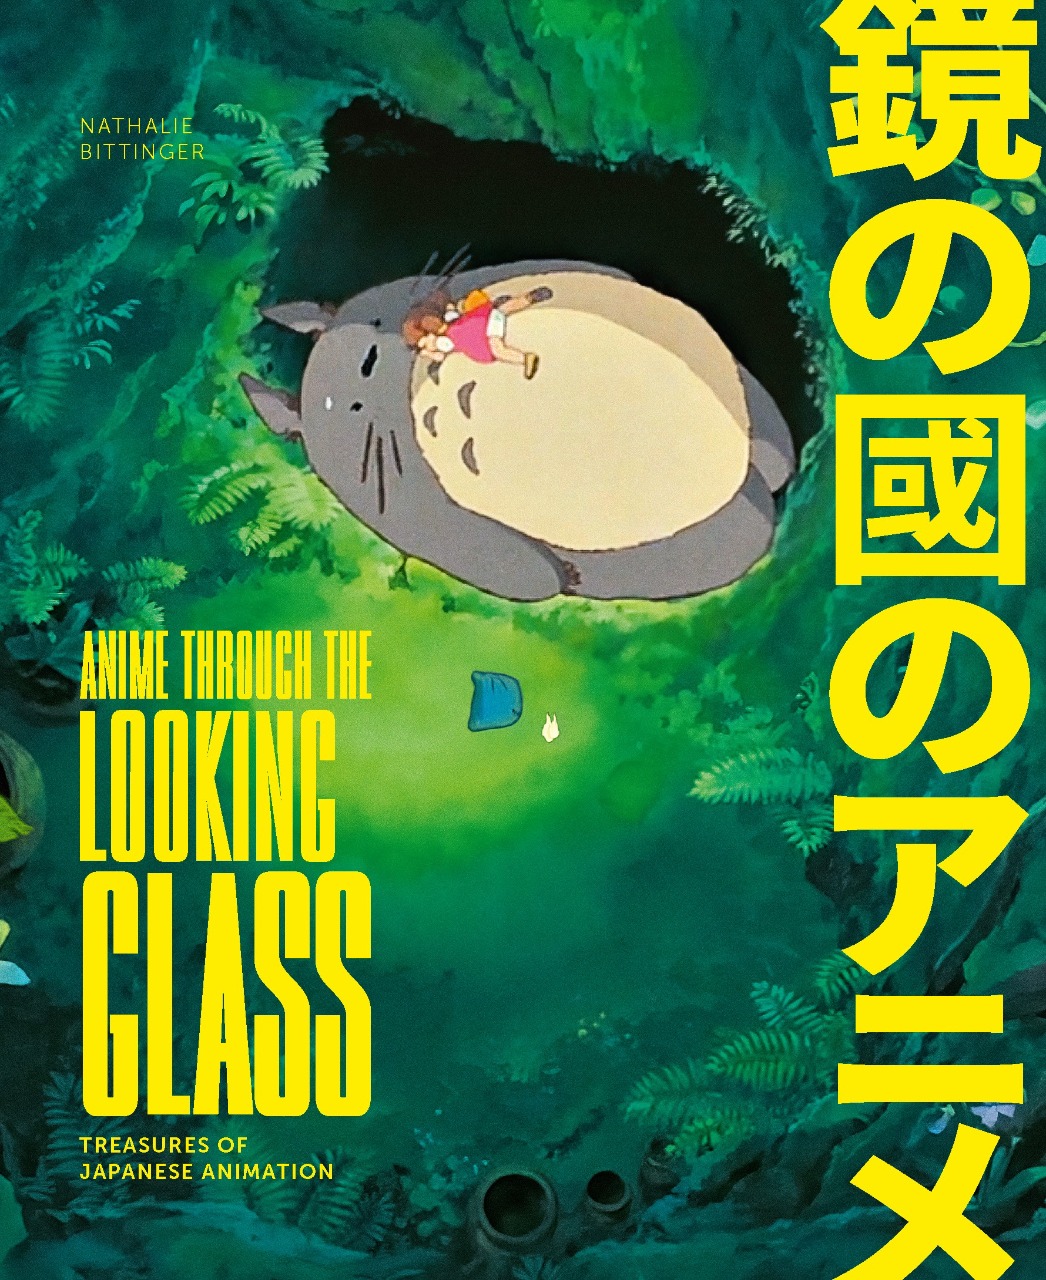 Anime Through The Looking-Glass, ISBN: 9783791380148 - available from  Nationwide Book Distributors Ltd NZ.